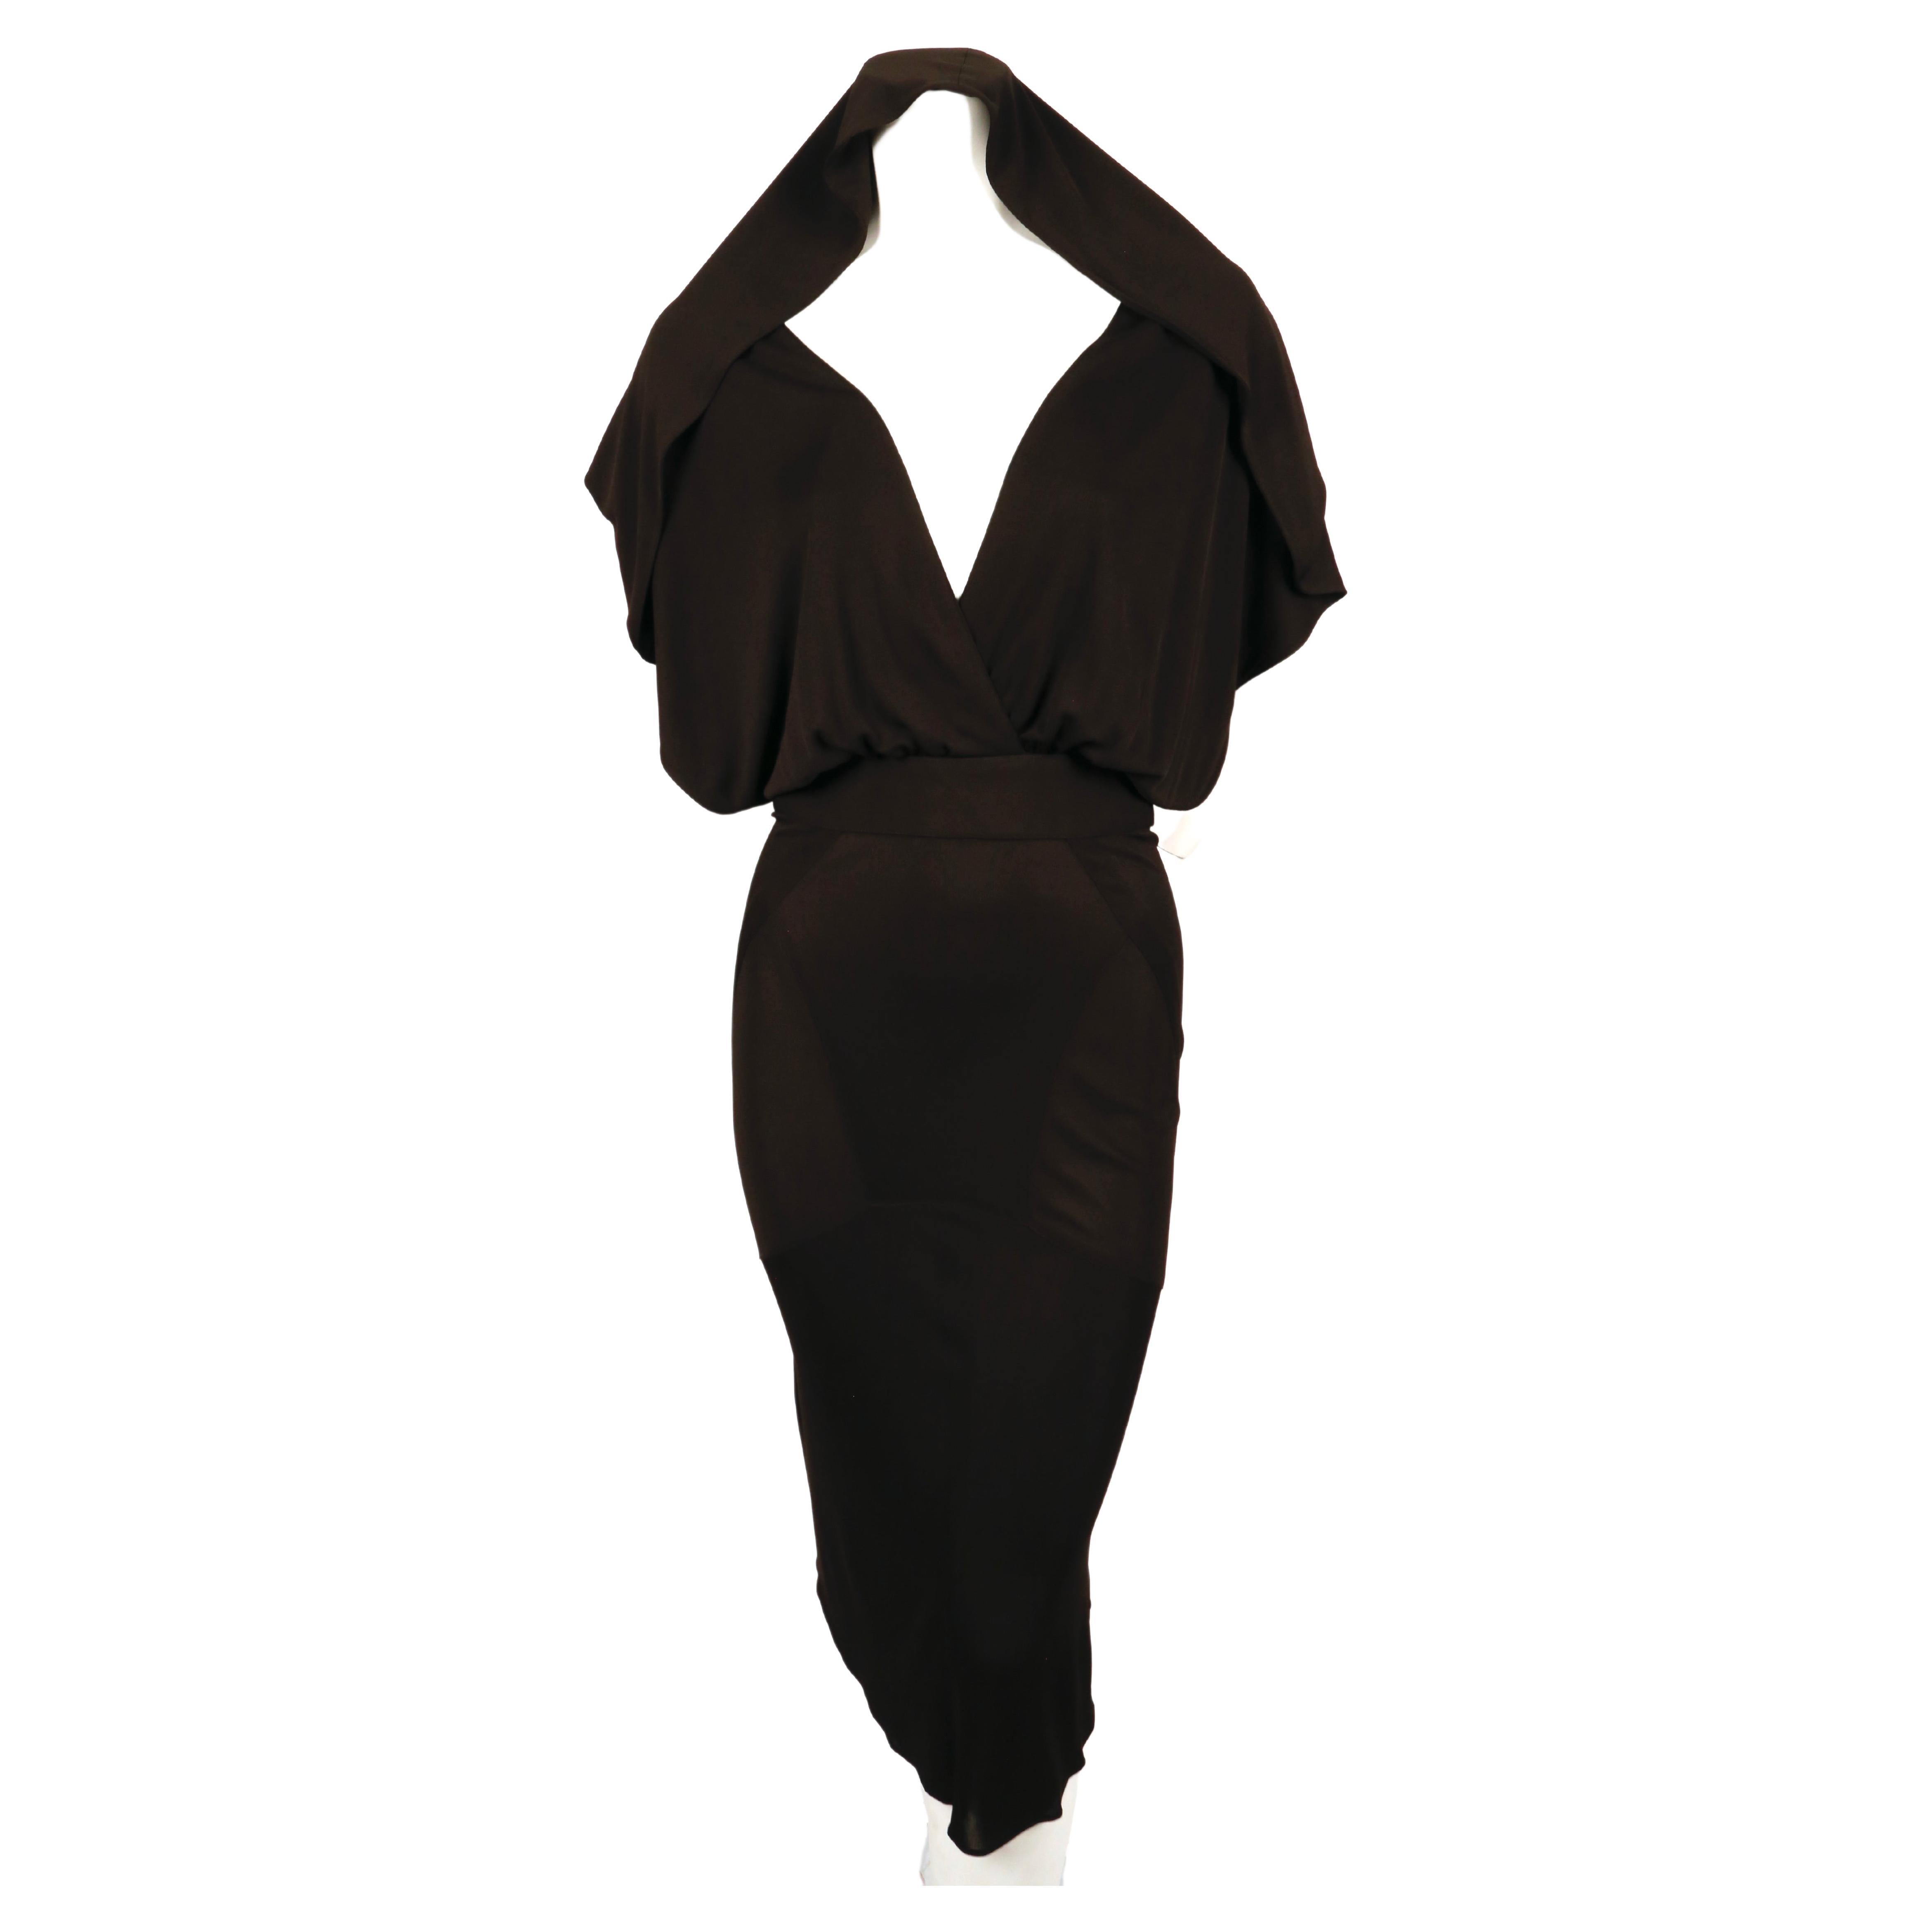 very rare 1984 AZZEDINE ALAIA iconic hooded jersey dress For Sale 6